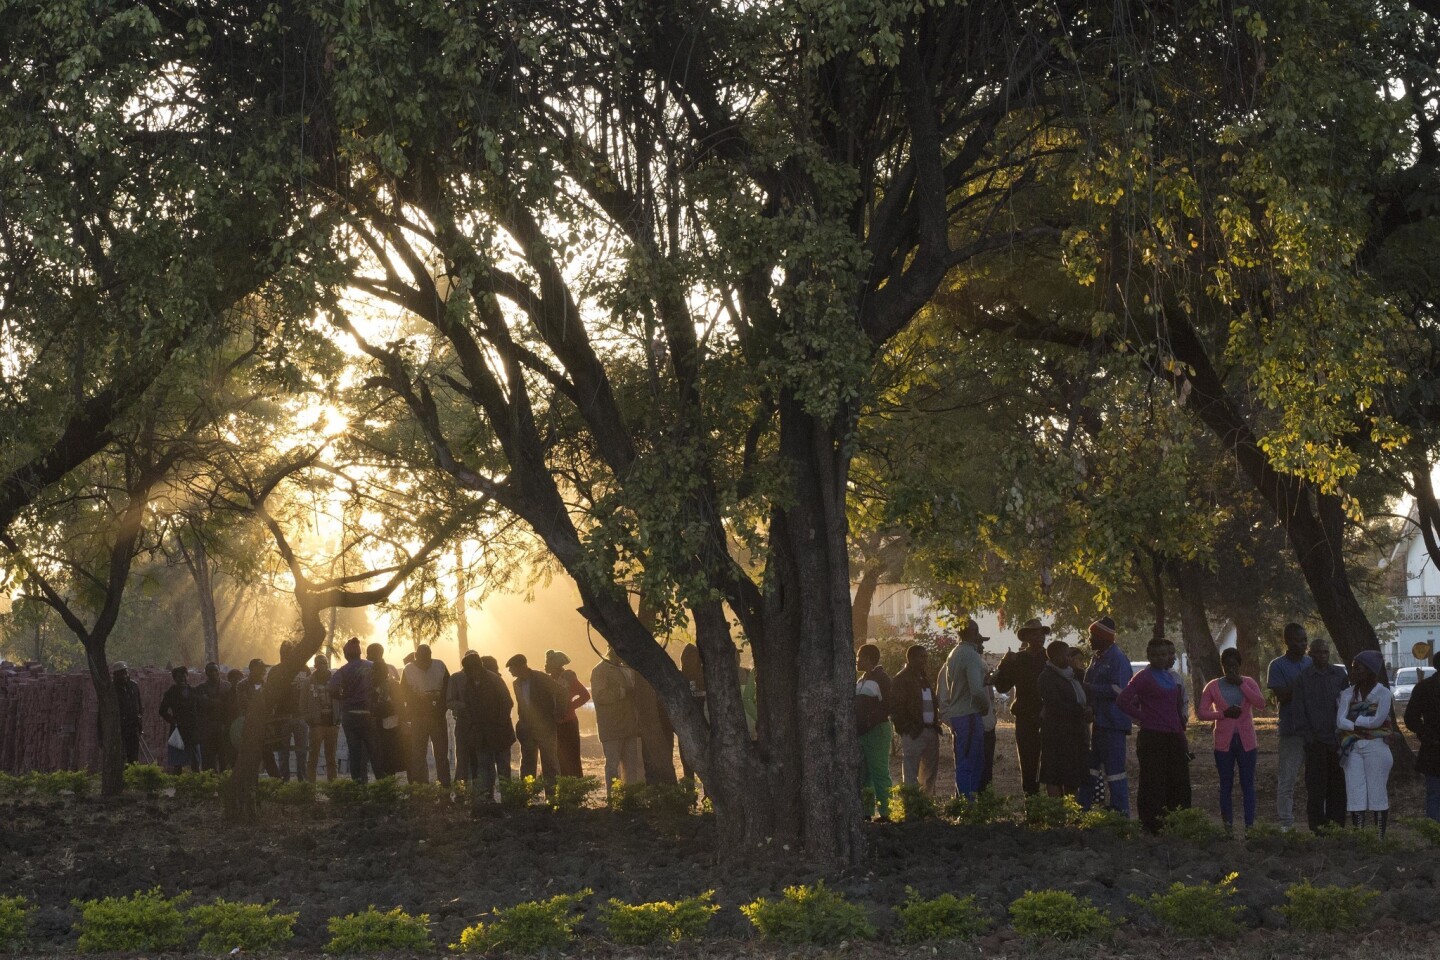 Zimbabweans line up to vote at the Fitchela primary school in Kwekwe, Zimbabwe, on July 30. The vote will be a first for the southern African nation following a military takeover and the ousting of former long-term leader Robert Mugabe.